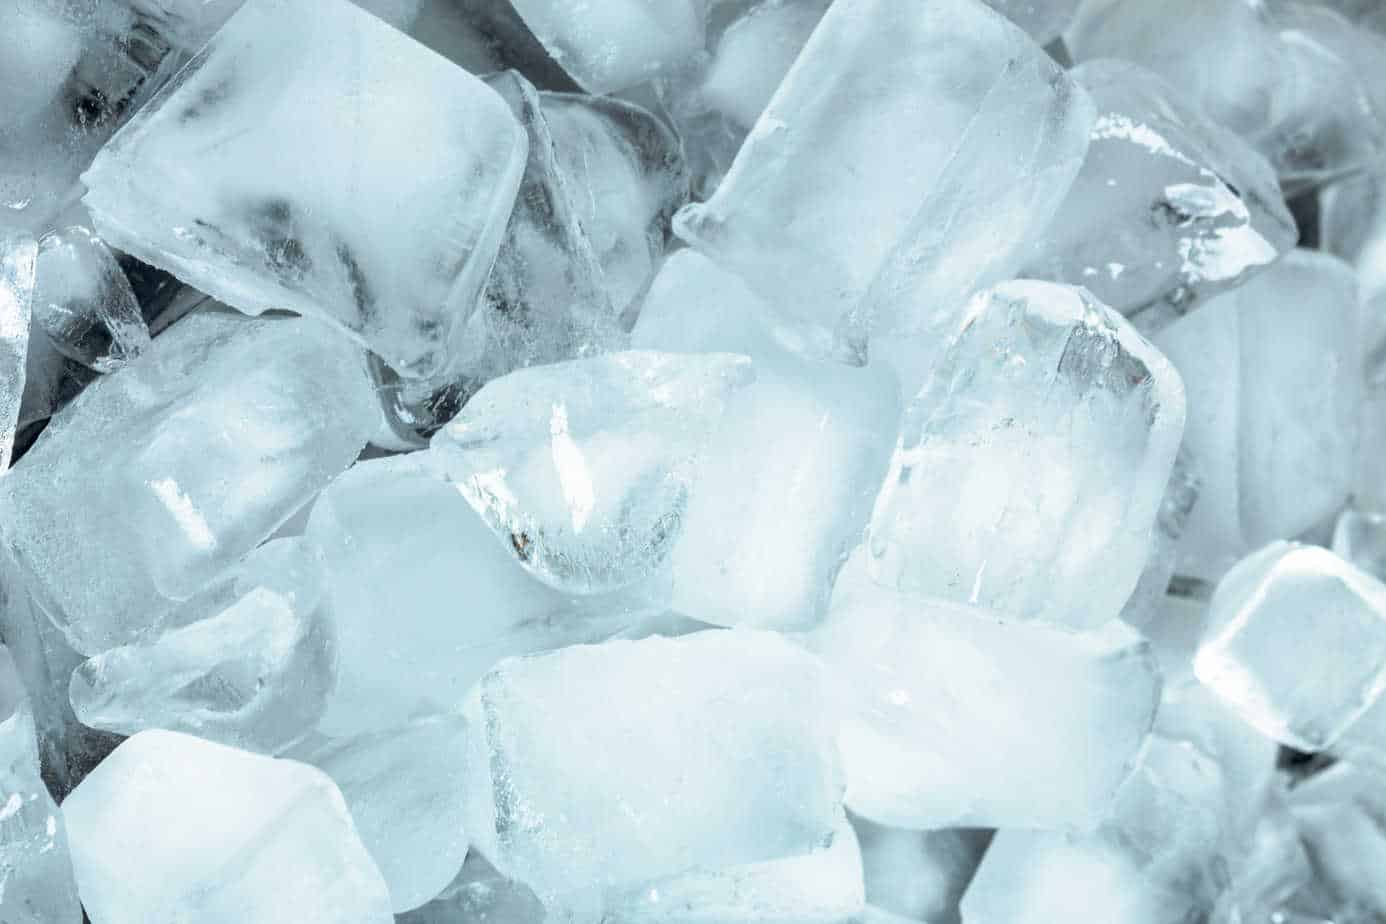 Why the Ice You Make at Home is Cloudy - Crystal Ice